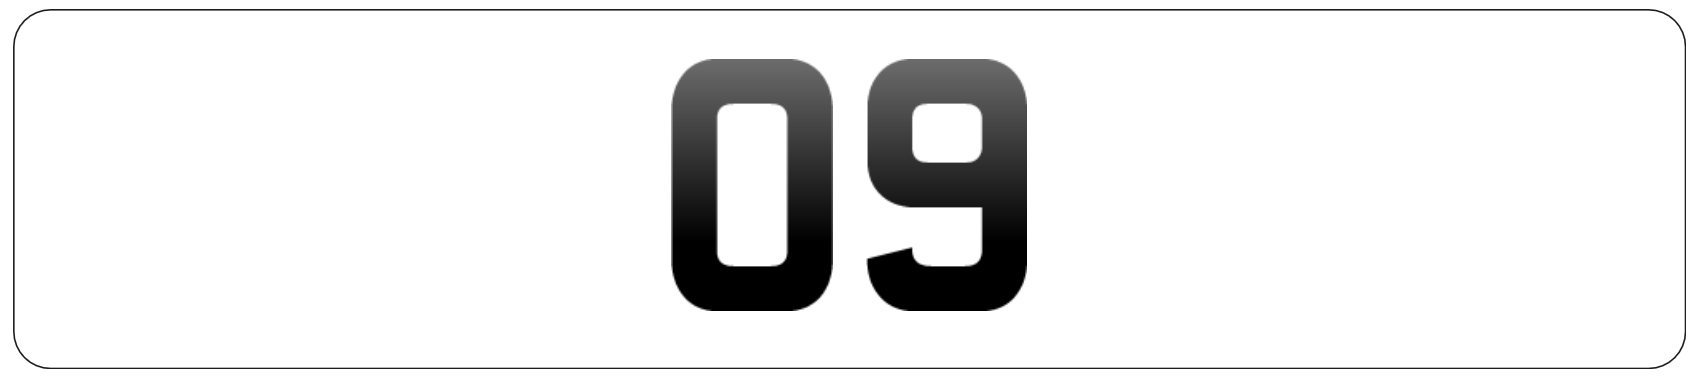 O9 number plate